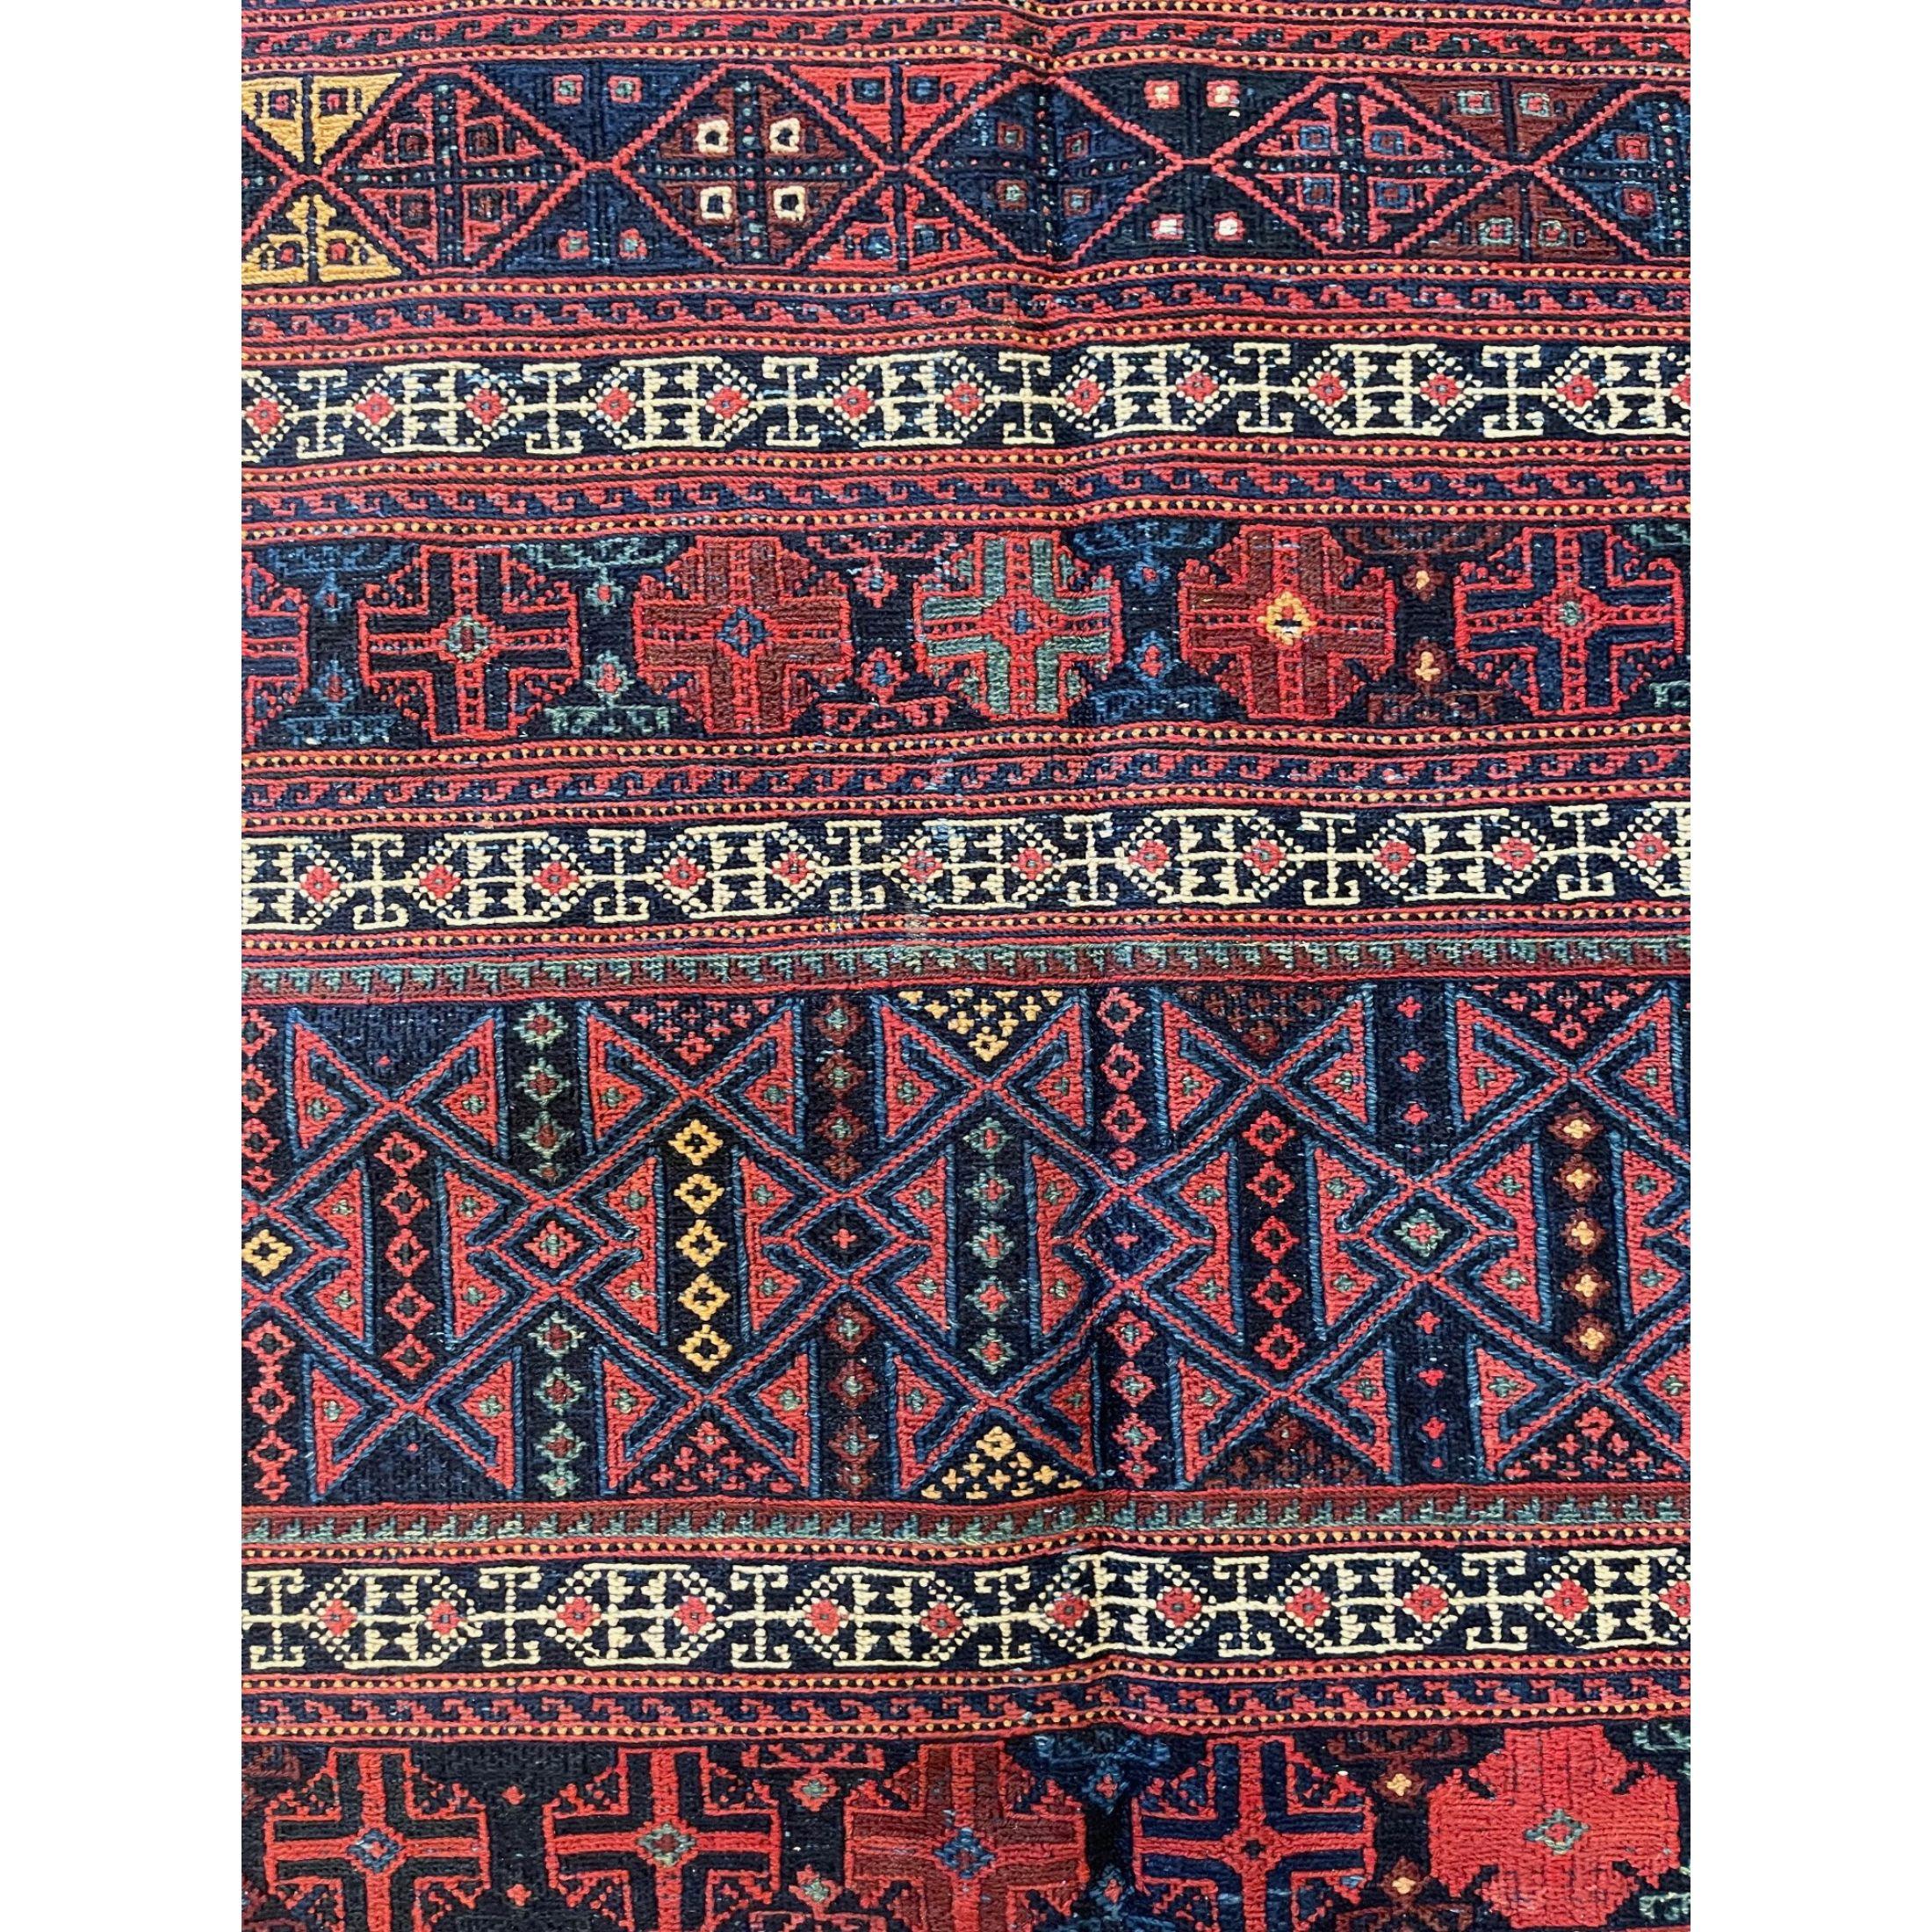 oumak rugs (also spelled Sumak) – This construction technique produces a flat-weave rug that is thick, strong and exceptionally durable. Unlike kilims, Soumak rugs are not reversible because non-clipped yarns are left on the back. However, they are